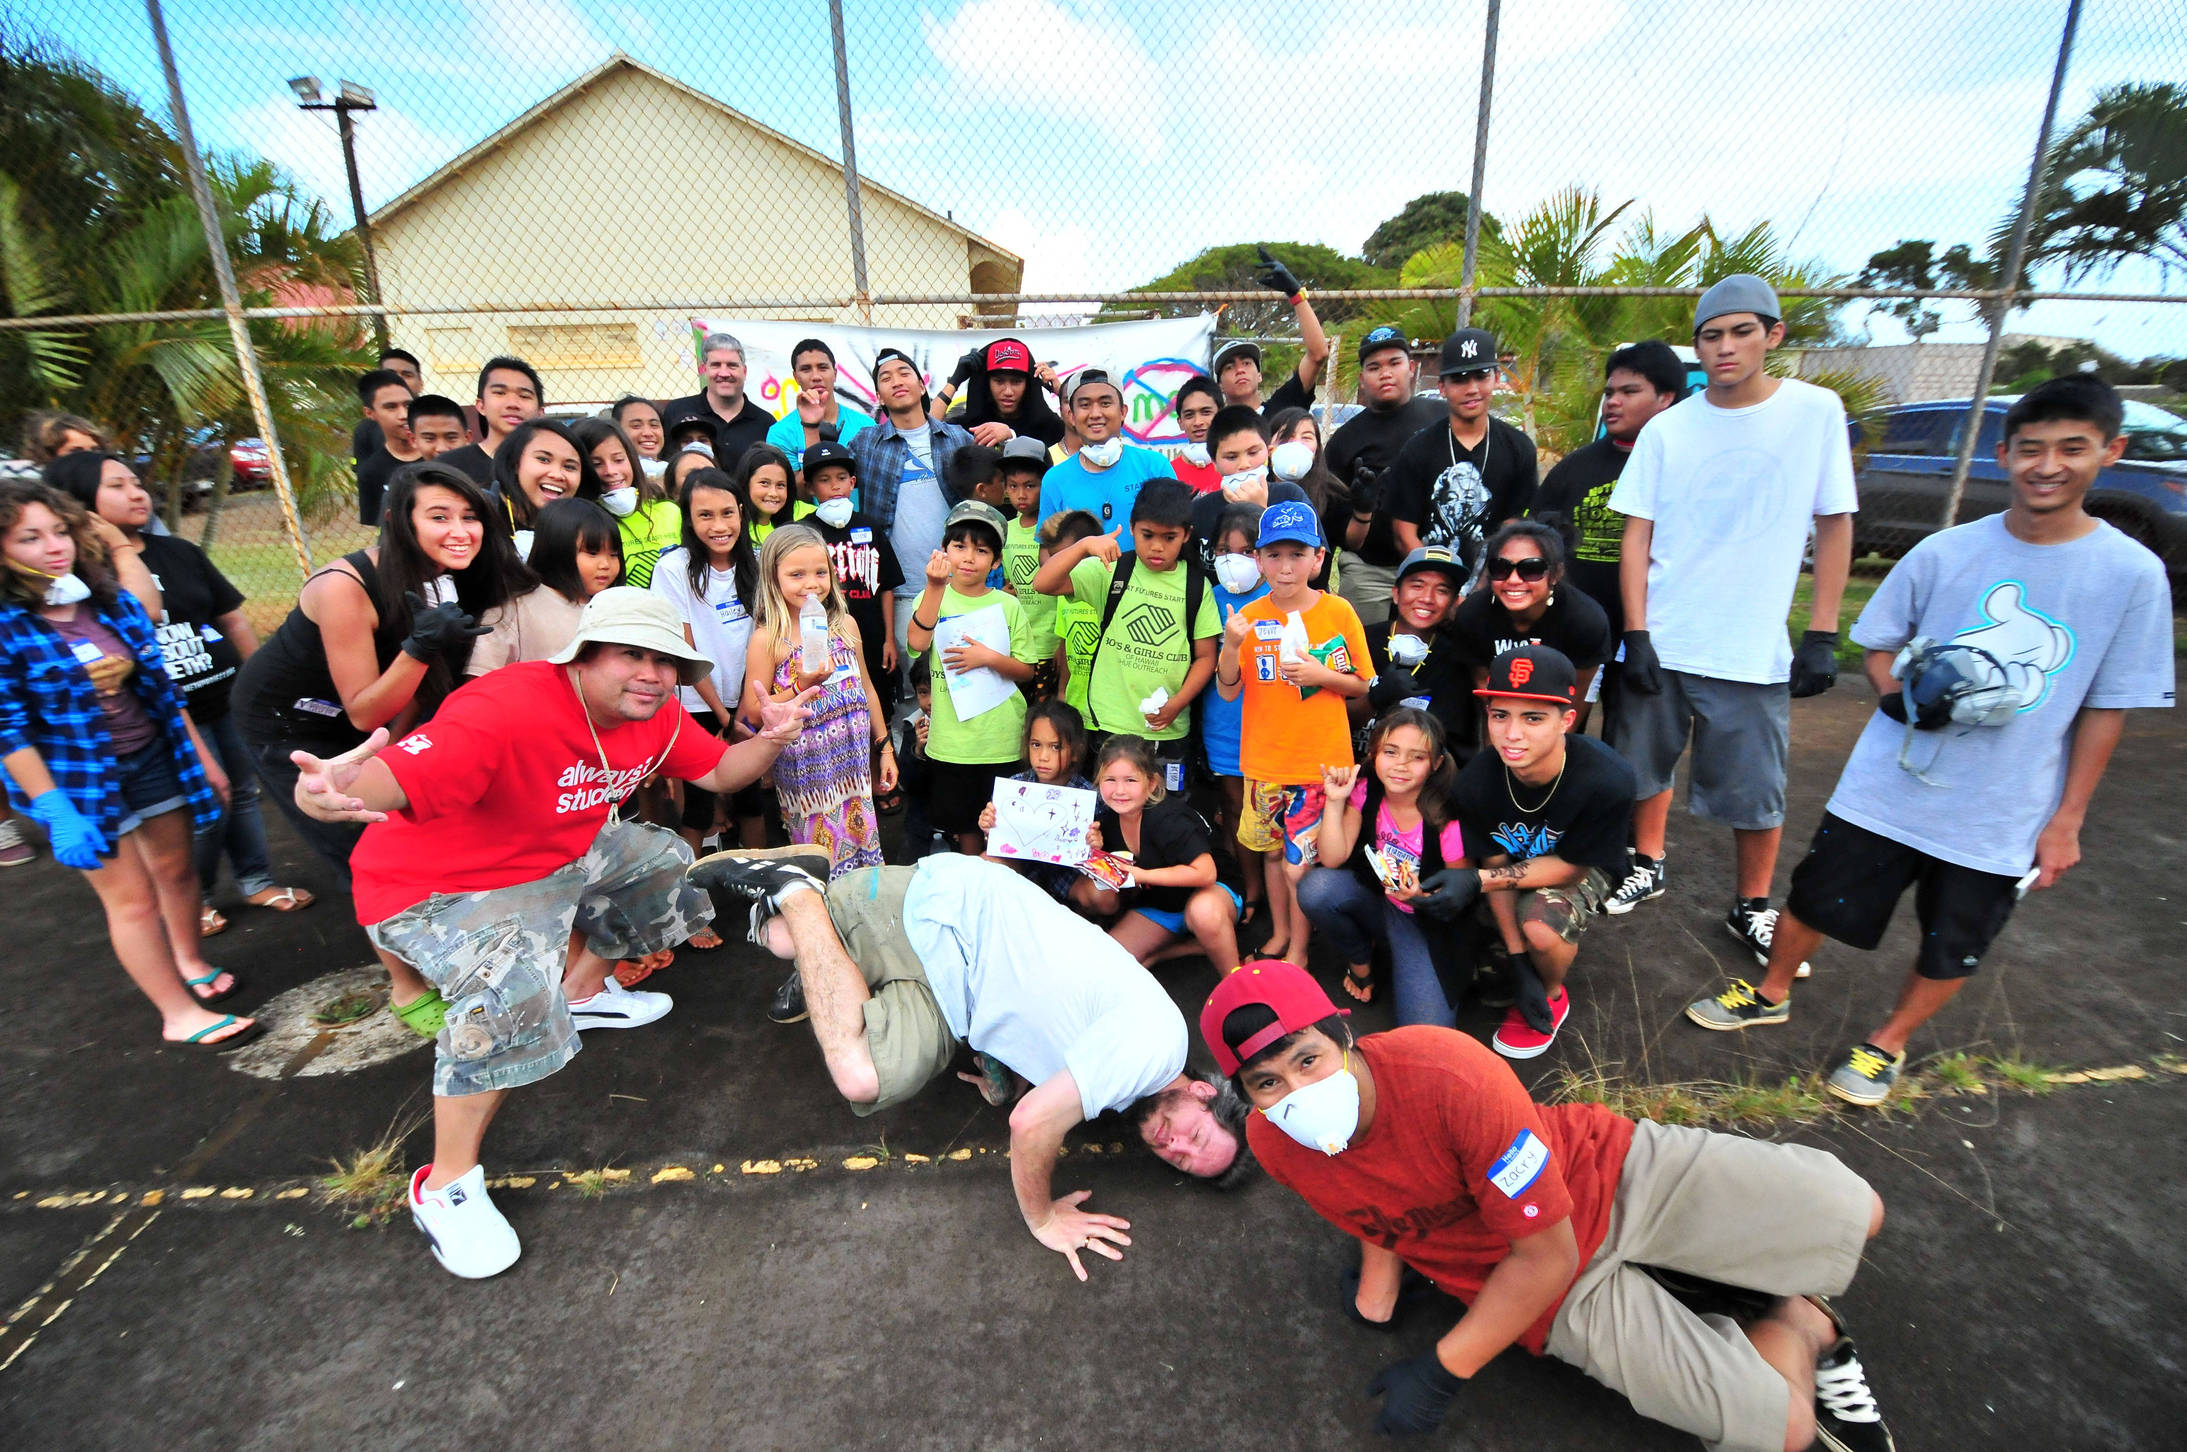 Kauai students pose with artist East3 after the completion of the first day of art workshops. Over 100 students from Kauai were registered to attend the Spray Away Meth art workshop series over the 2-day period. 